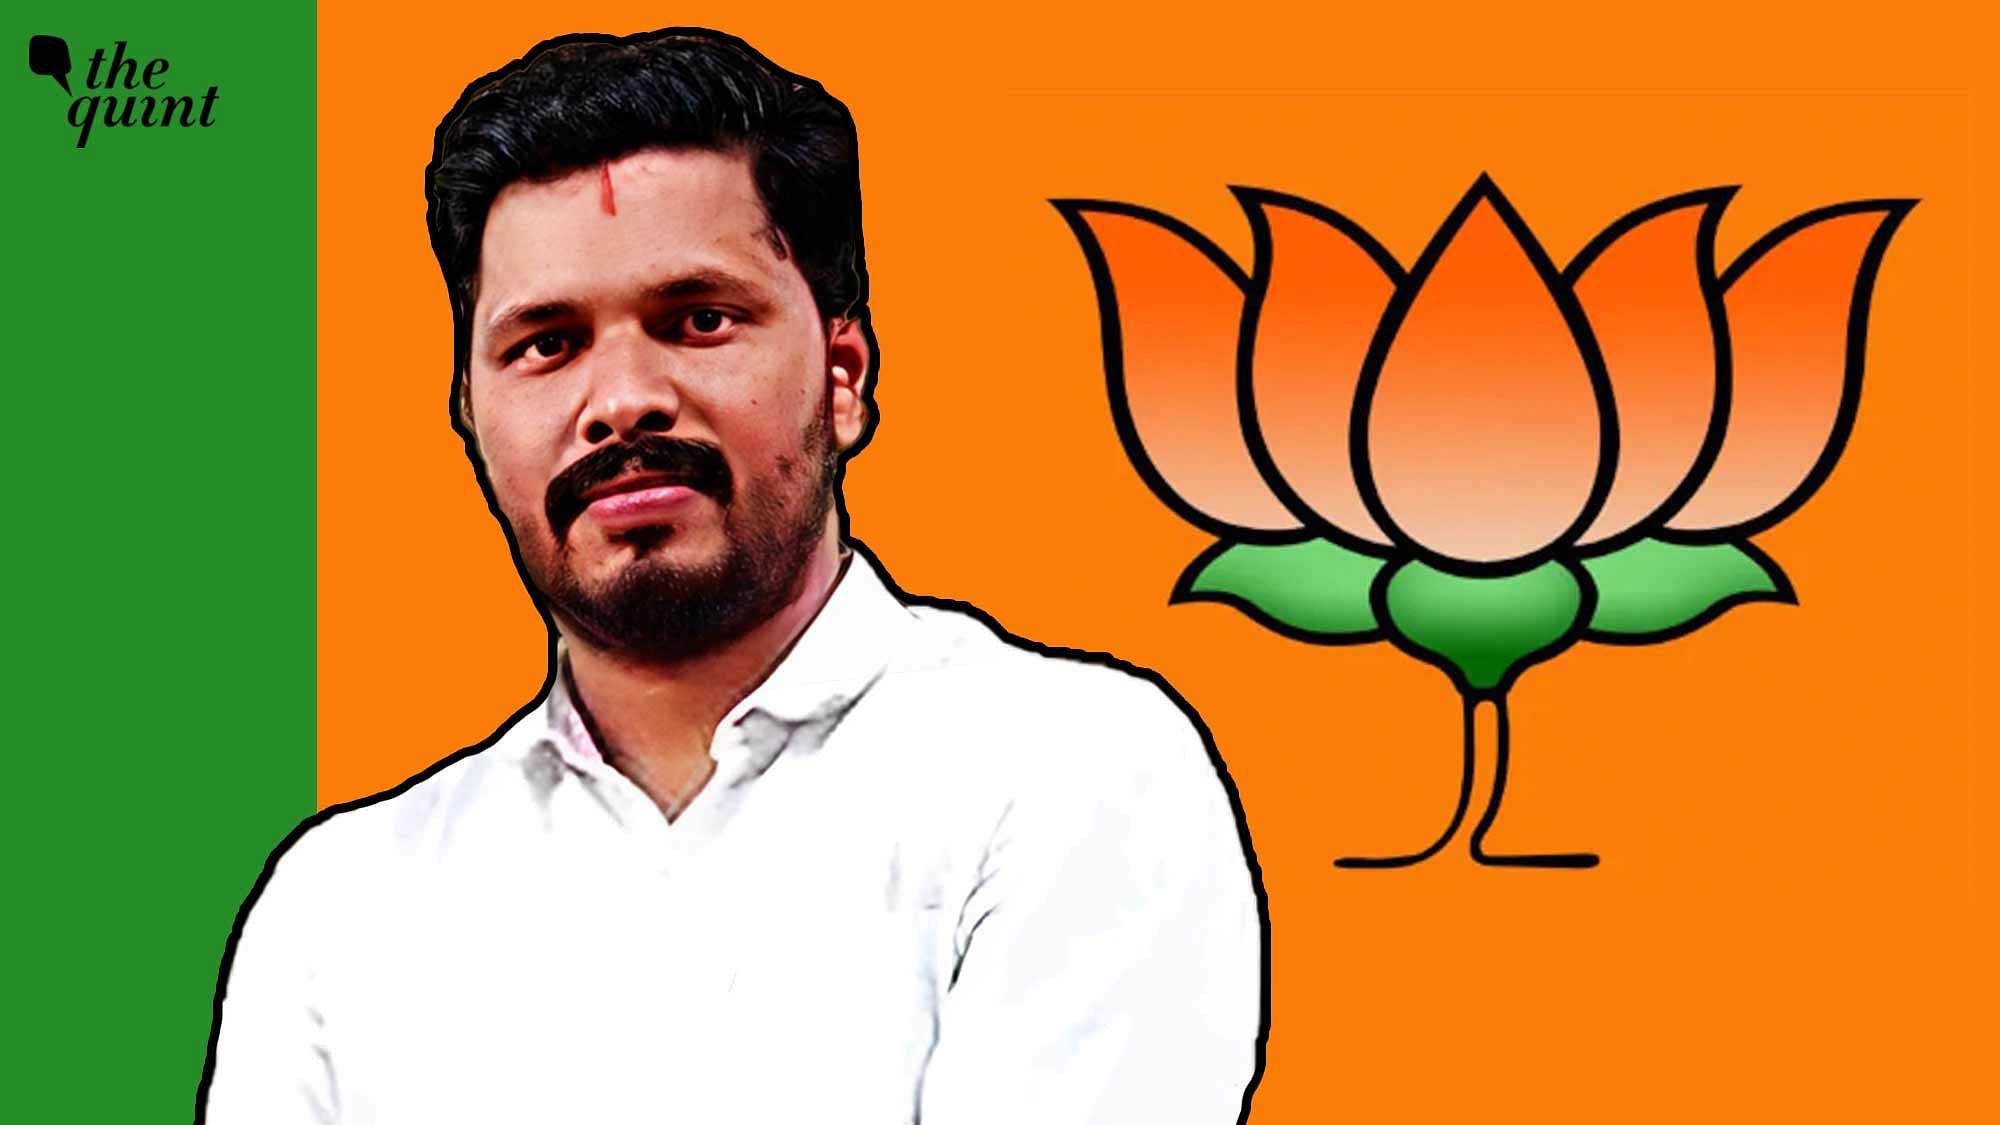 <div class="paragraphs"><p>Two days after a youth leader of the <a href="https://www.thequint.com/topic/karnataka">Bharatiya Janata Party (BJP)</a> Praveen Nettaru was killed in Karnataka, two persons – Zakir and Shafique – were arrested in connection with the <a href="https://www.thequint.com/south-india/bjp-youth-leader-murdered-in-karnatakas-dakshin-kannada-by-men-on-bike-party-stages-protests">murder</a> on Thursday, 28 July.</p></div>